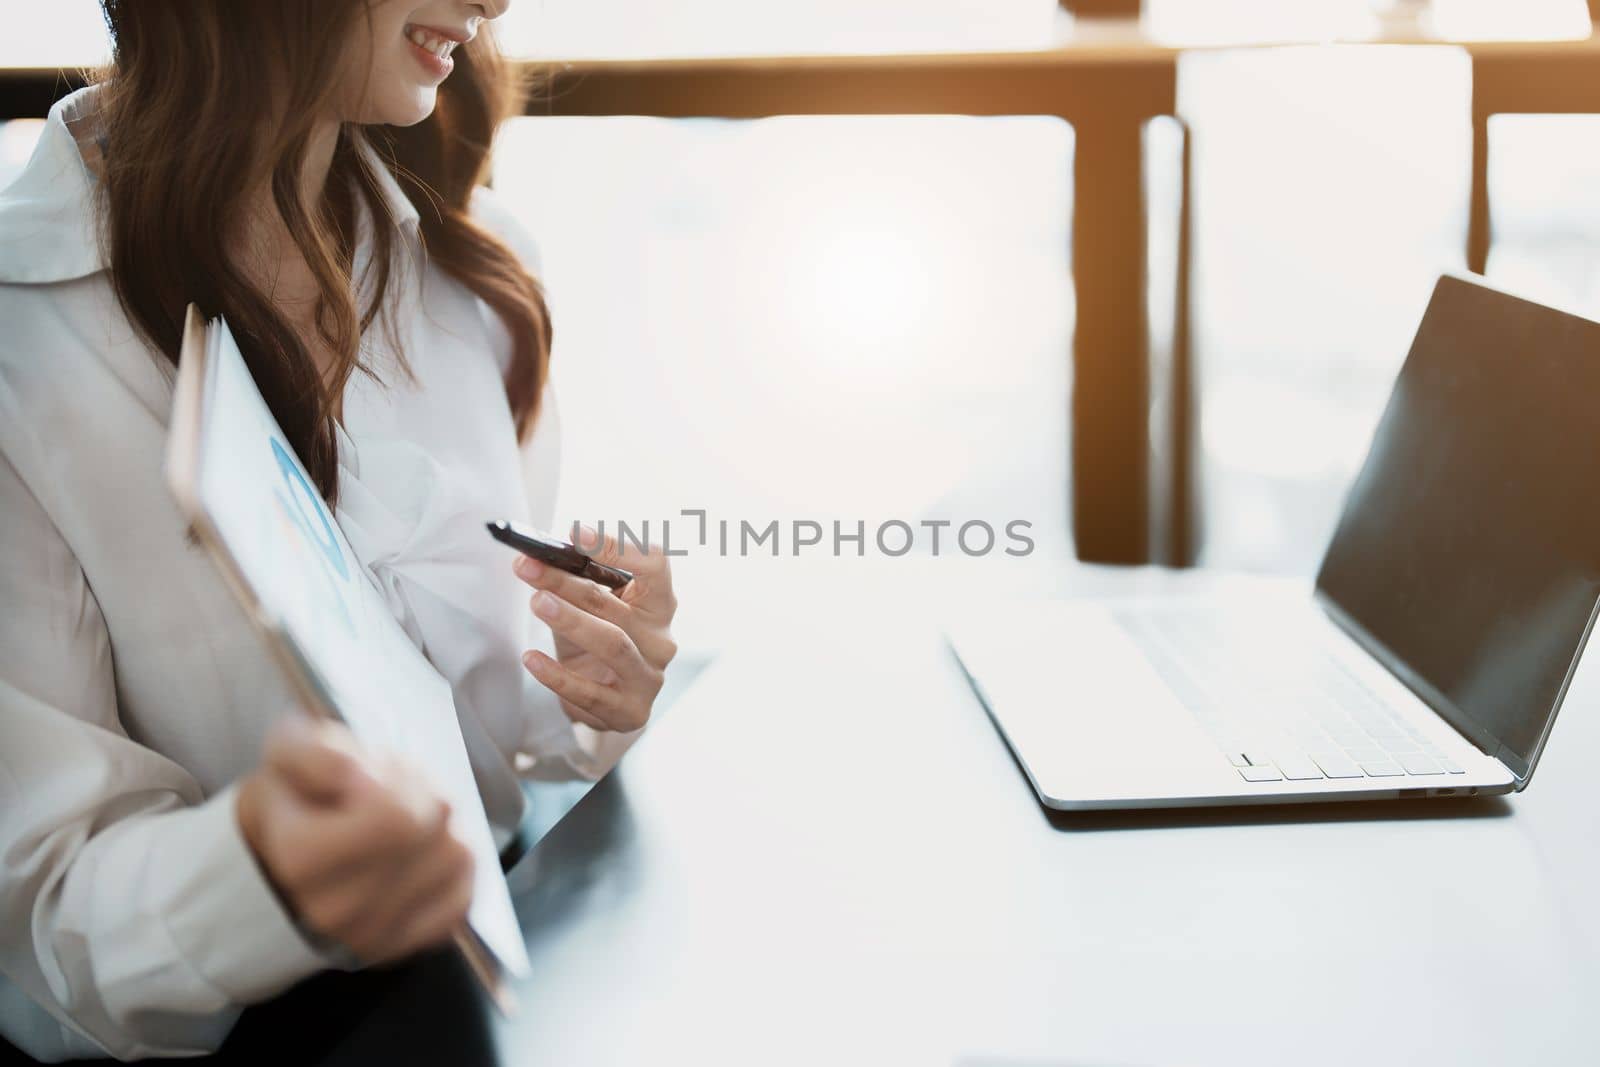 Business work and planning, portrait of a businesswoman using a computer in a meeting.